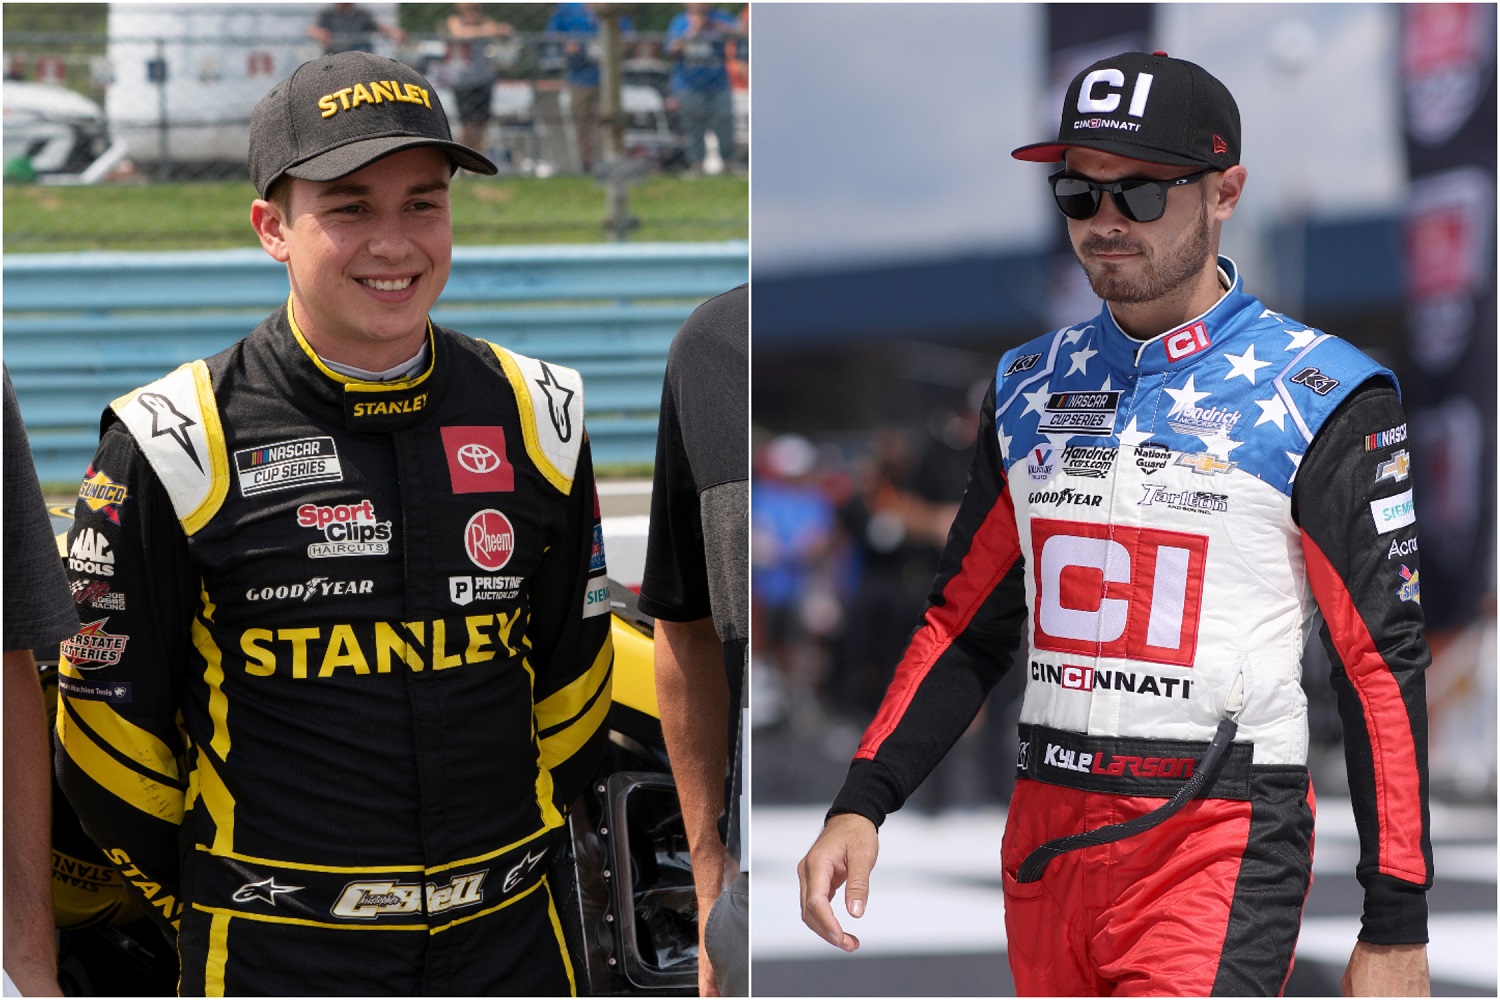 Christopher Bell and Kyle Larson drive in the NASCAR Cup Series for Joe Gibbs Racing and Hendrick Motorsports, respectively.